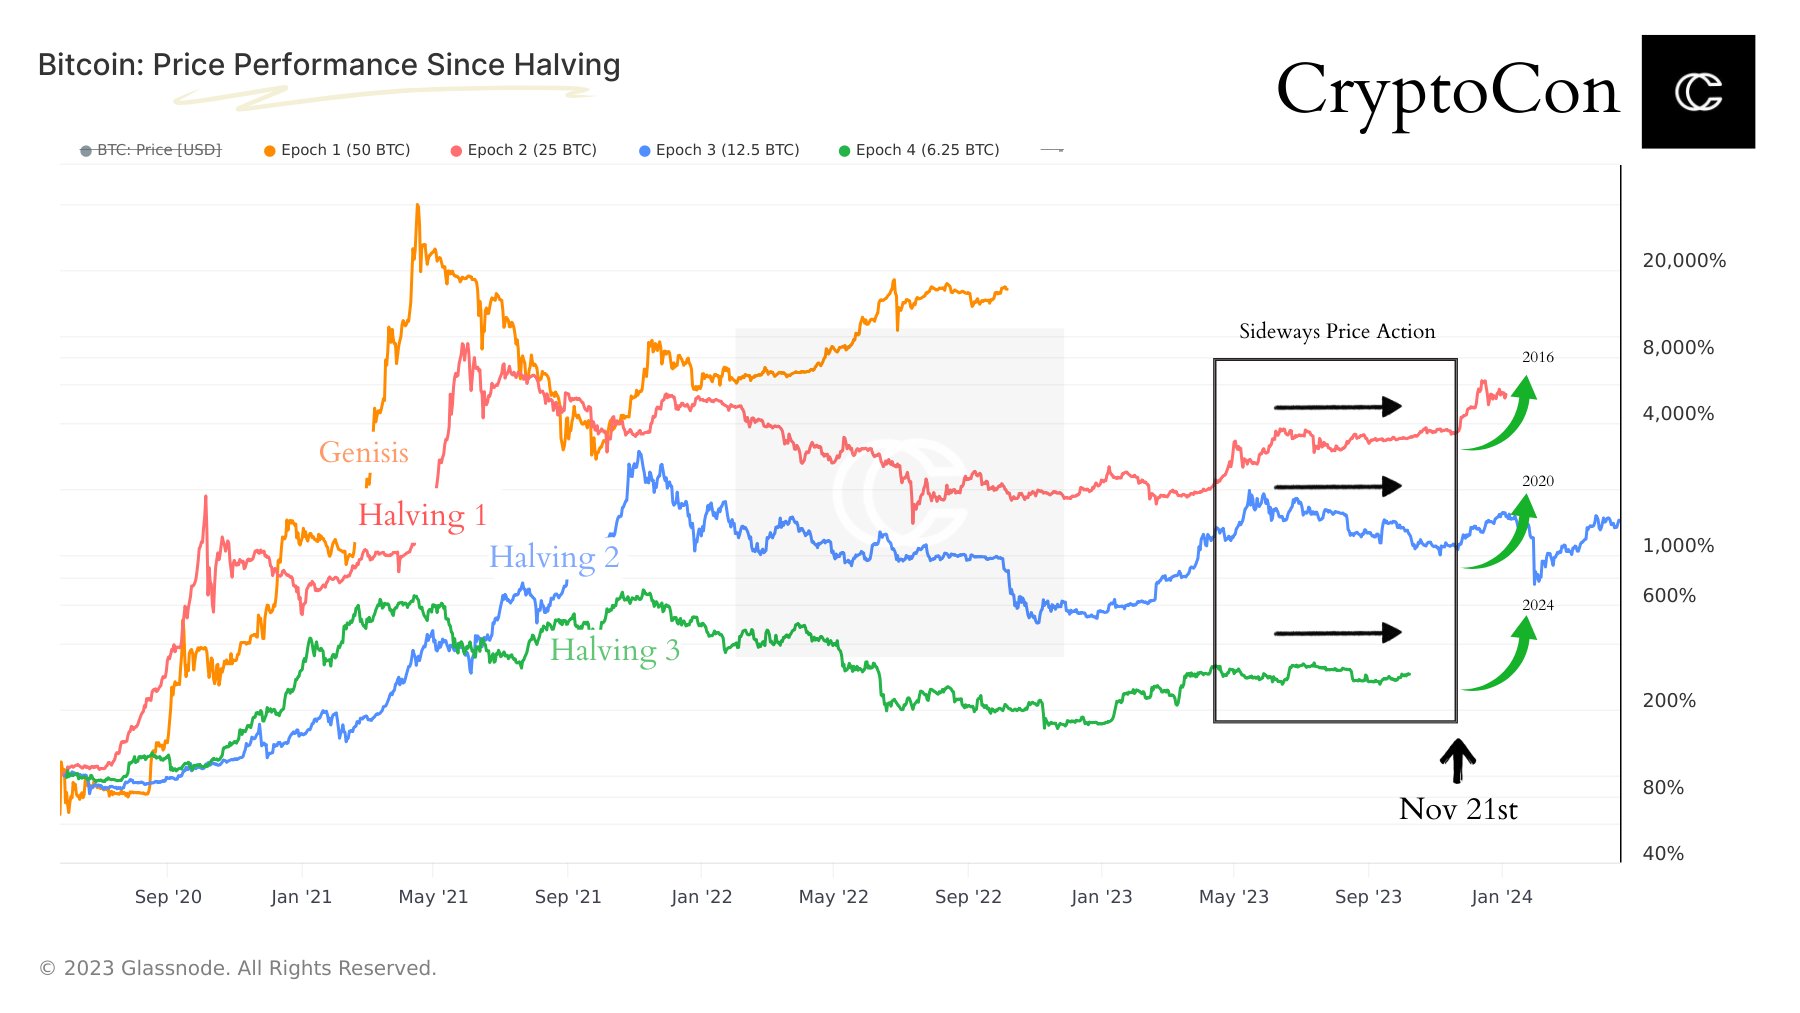 Bitcoin halving cycles compared. Source: X/@CryptoCon_